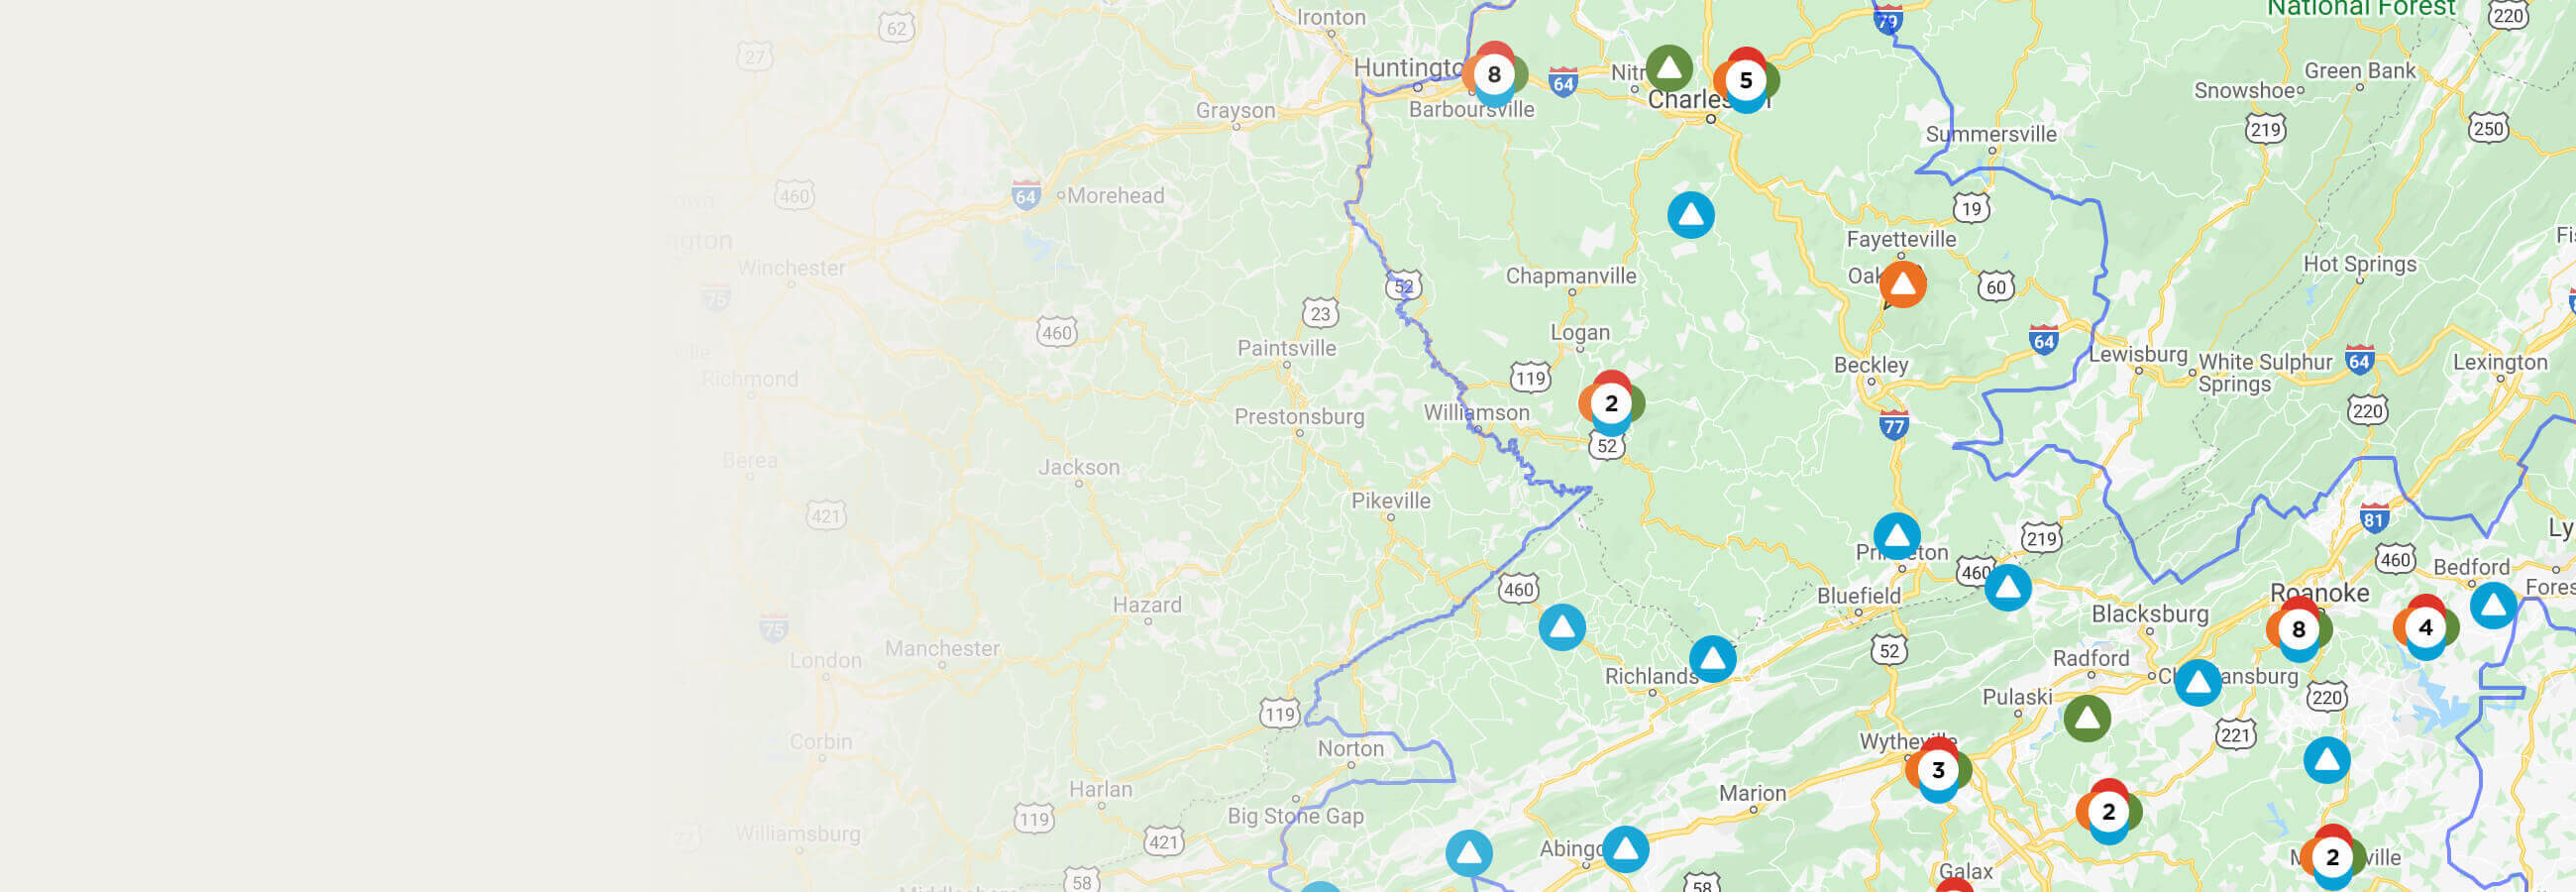 Outages/Map  Inter-County Energy Cooperative